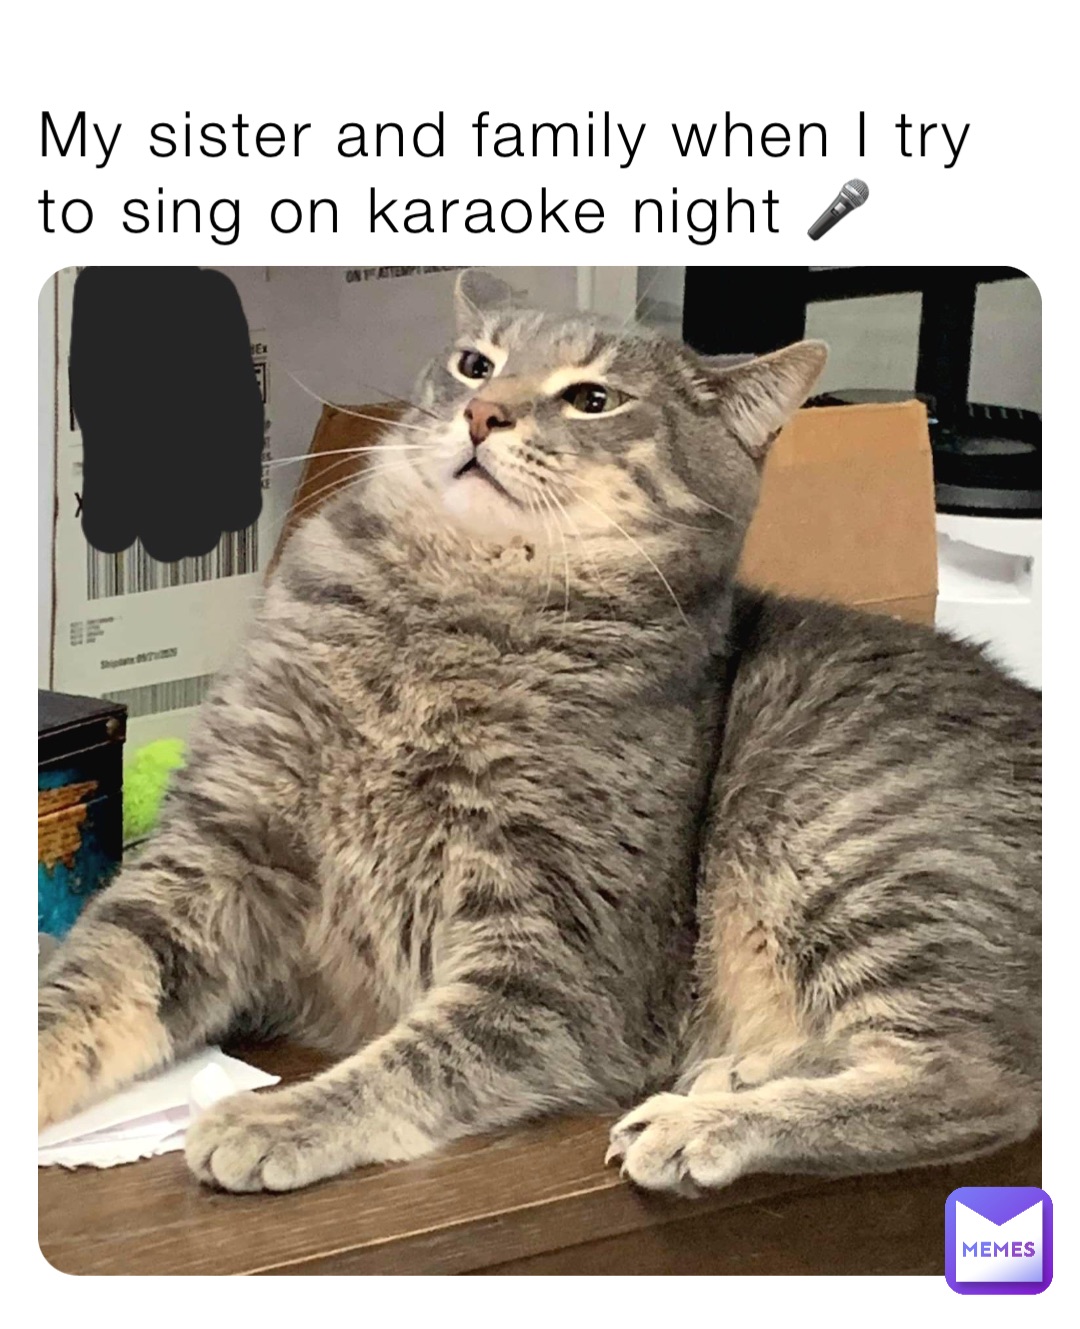 My sister and family when I try to sing on karaoke night 🎤